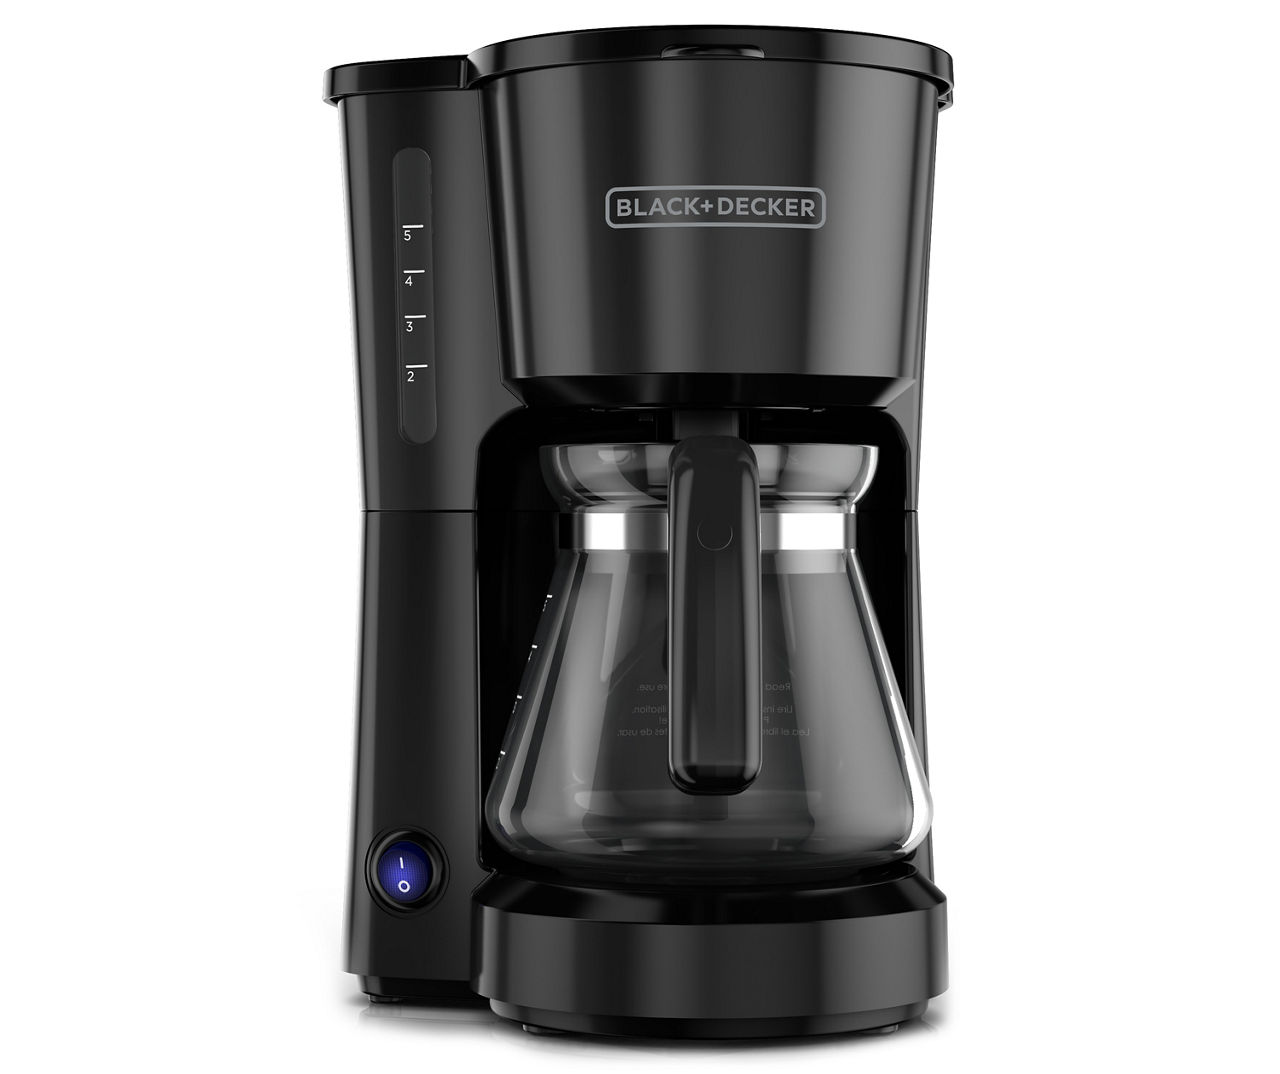 5CUP Coffee Maker - Space-Saving Design, Auto Pause and Serve